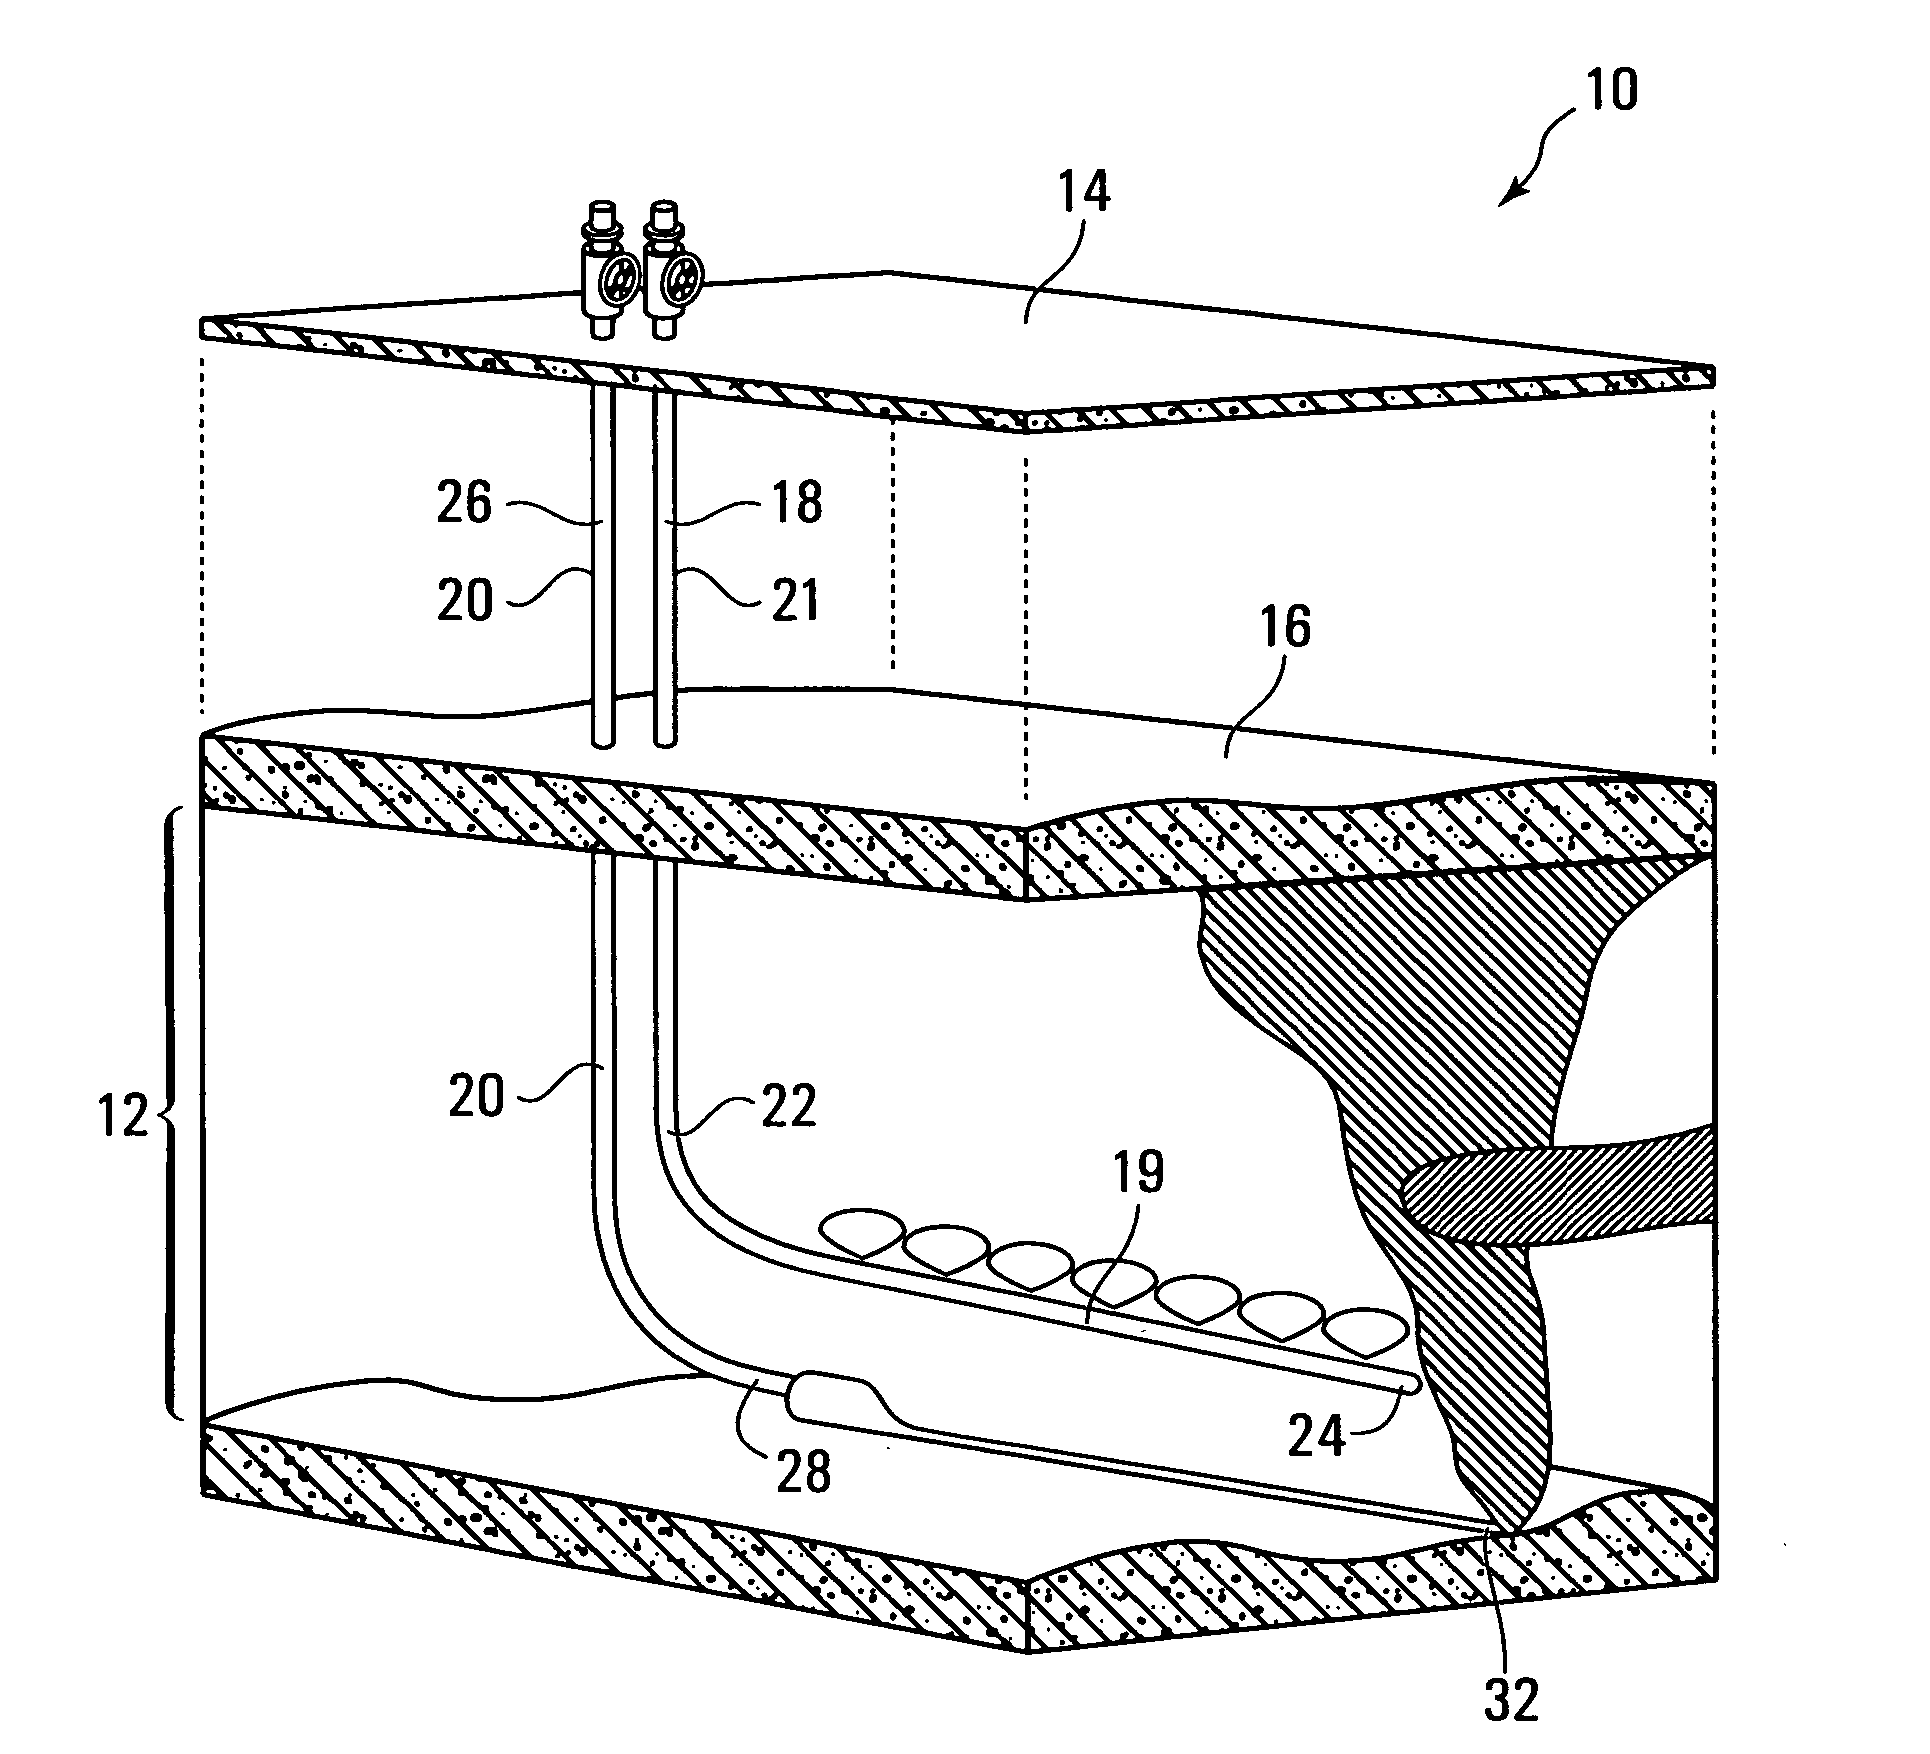 Pressure sensor arrangement using an optical fiber and methodologies for performing an analysis of a subterranean formation